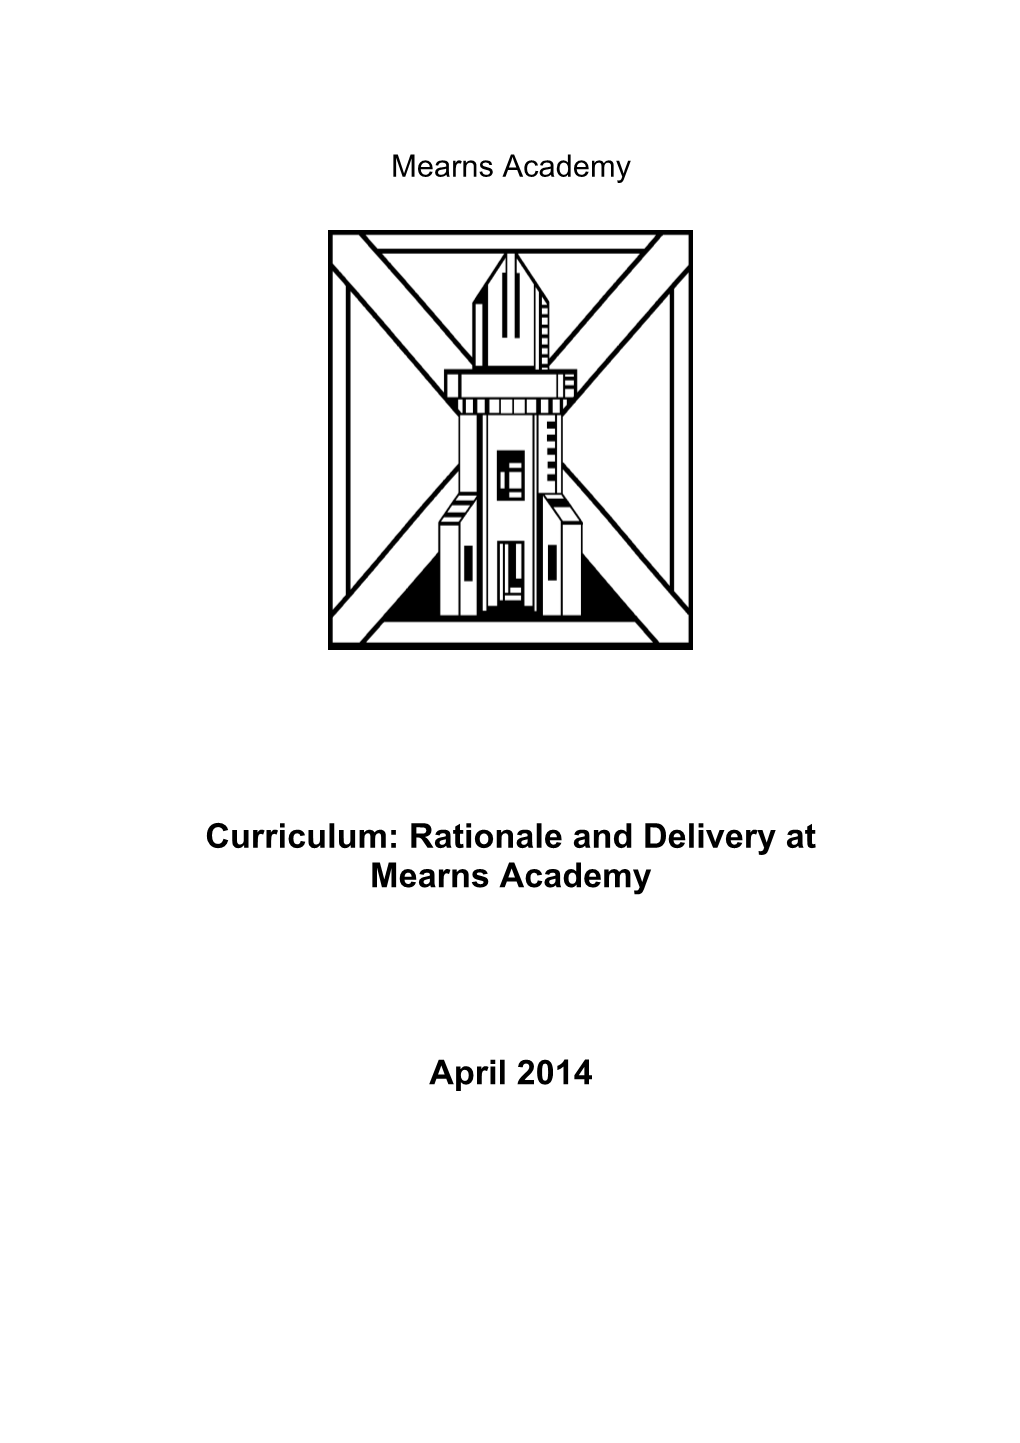 Curriculum: Rationale and Delivery at Mearnsacademy